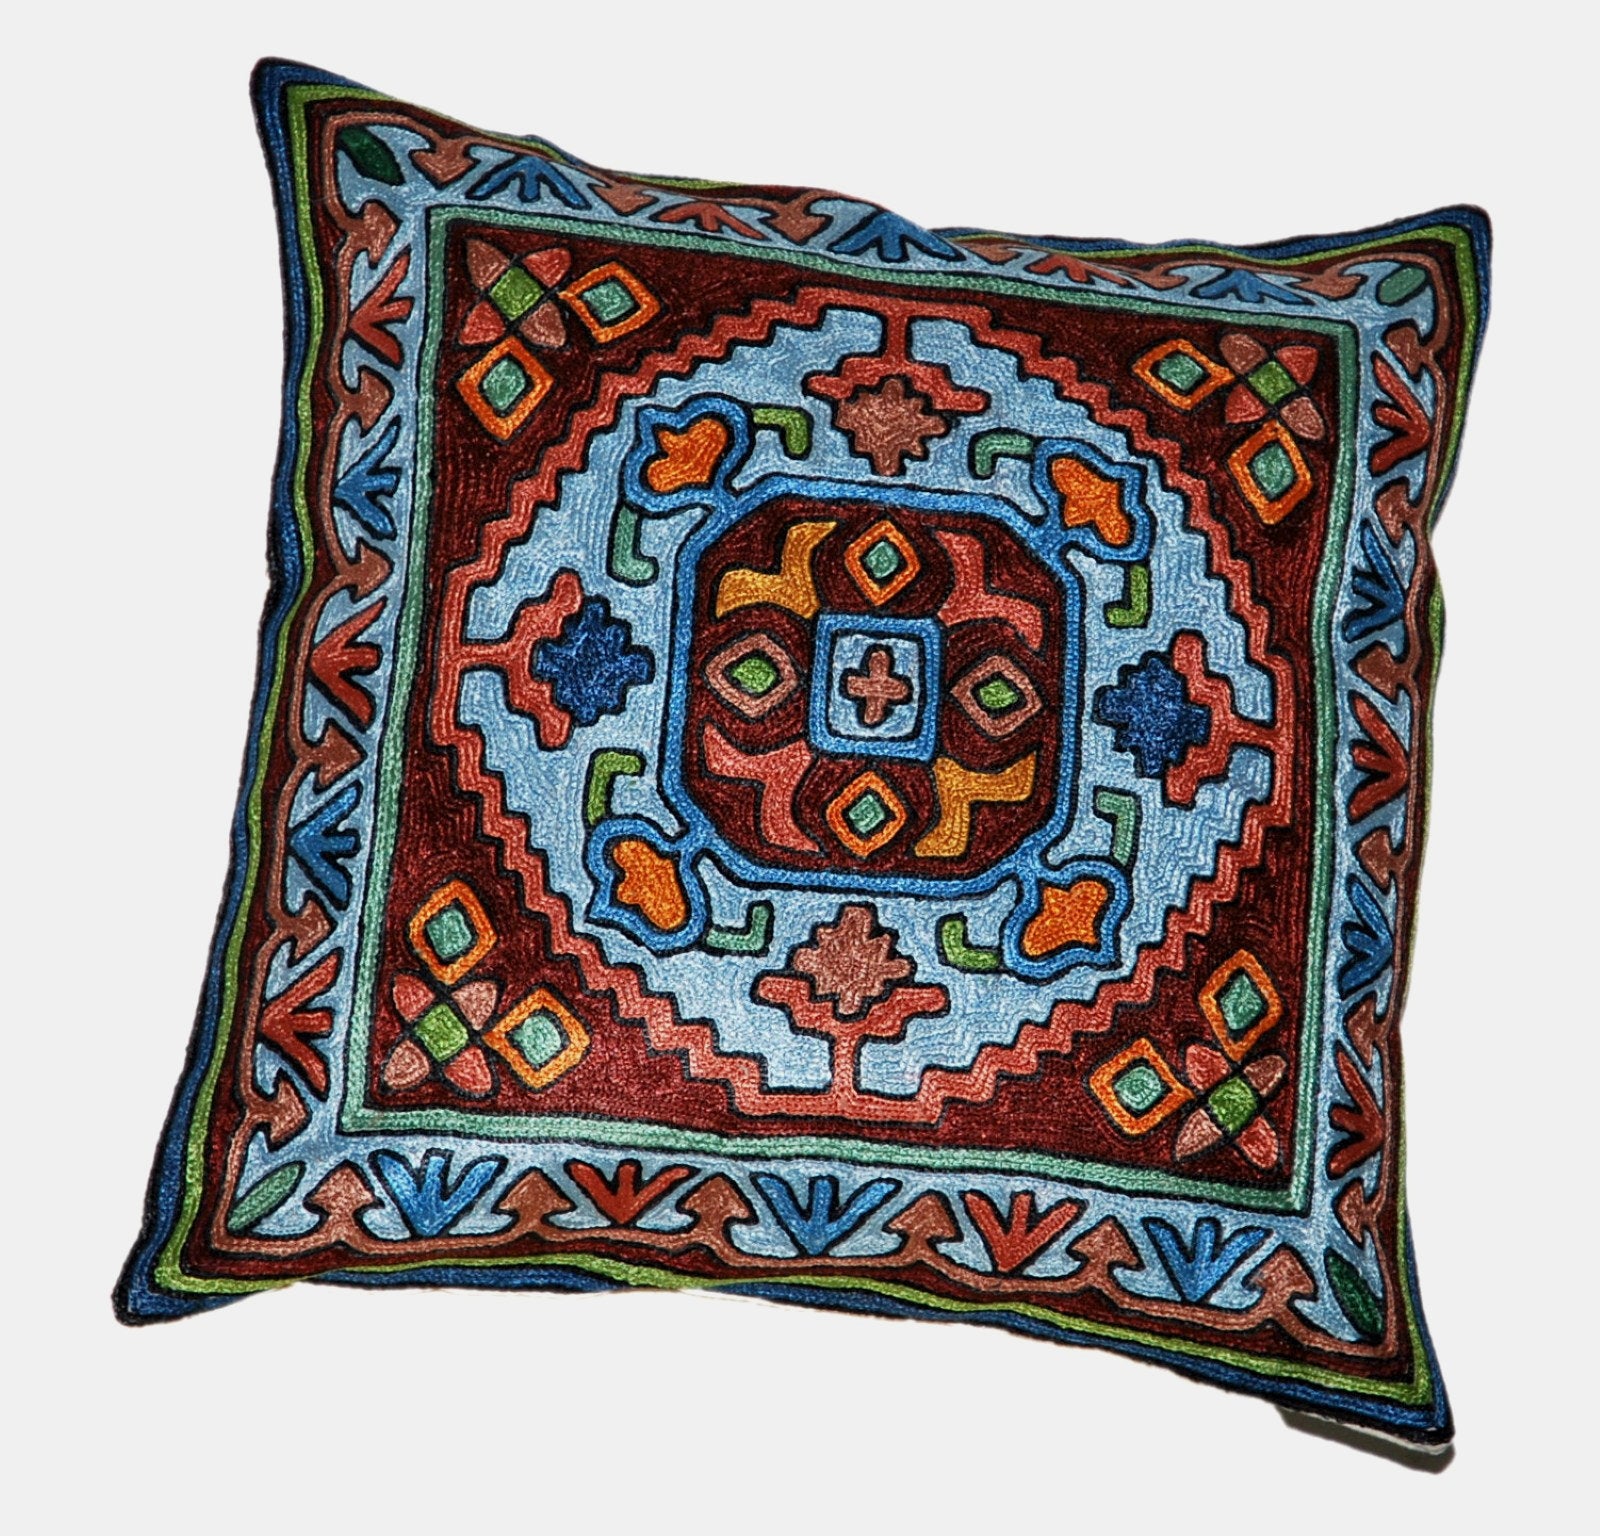 Crewel Silk Embroidered Cushion Throw Pillow Cover, Multicolor #CW2010